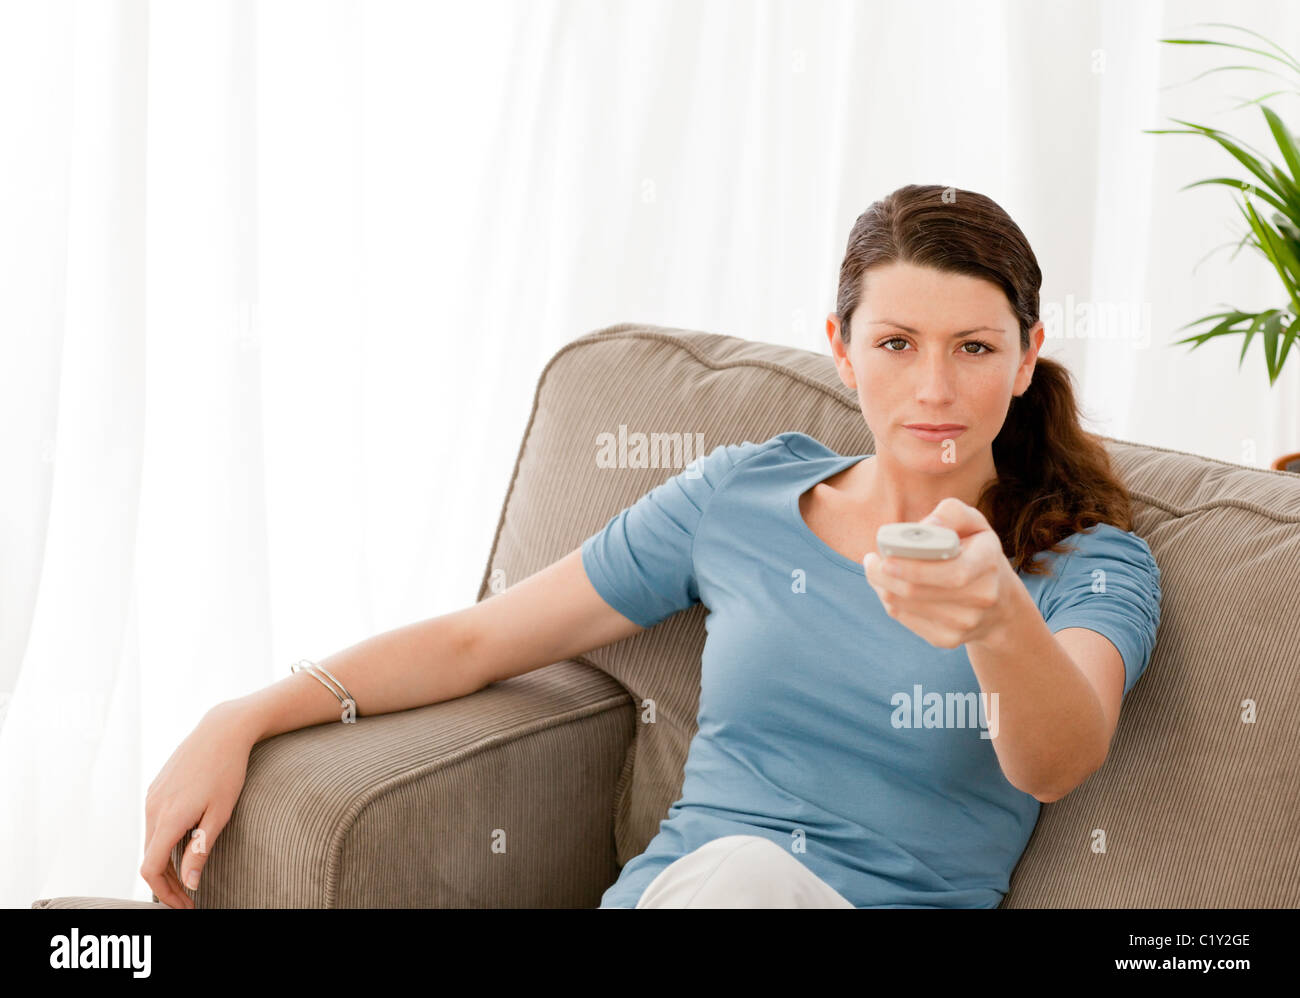 Charismatic woman watching television at home Stock Photo